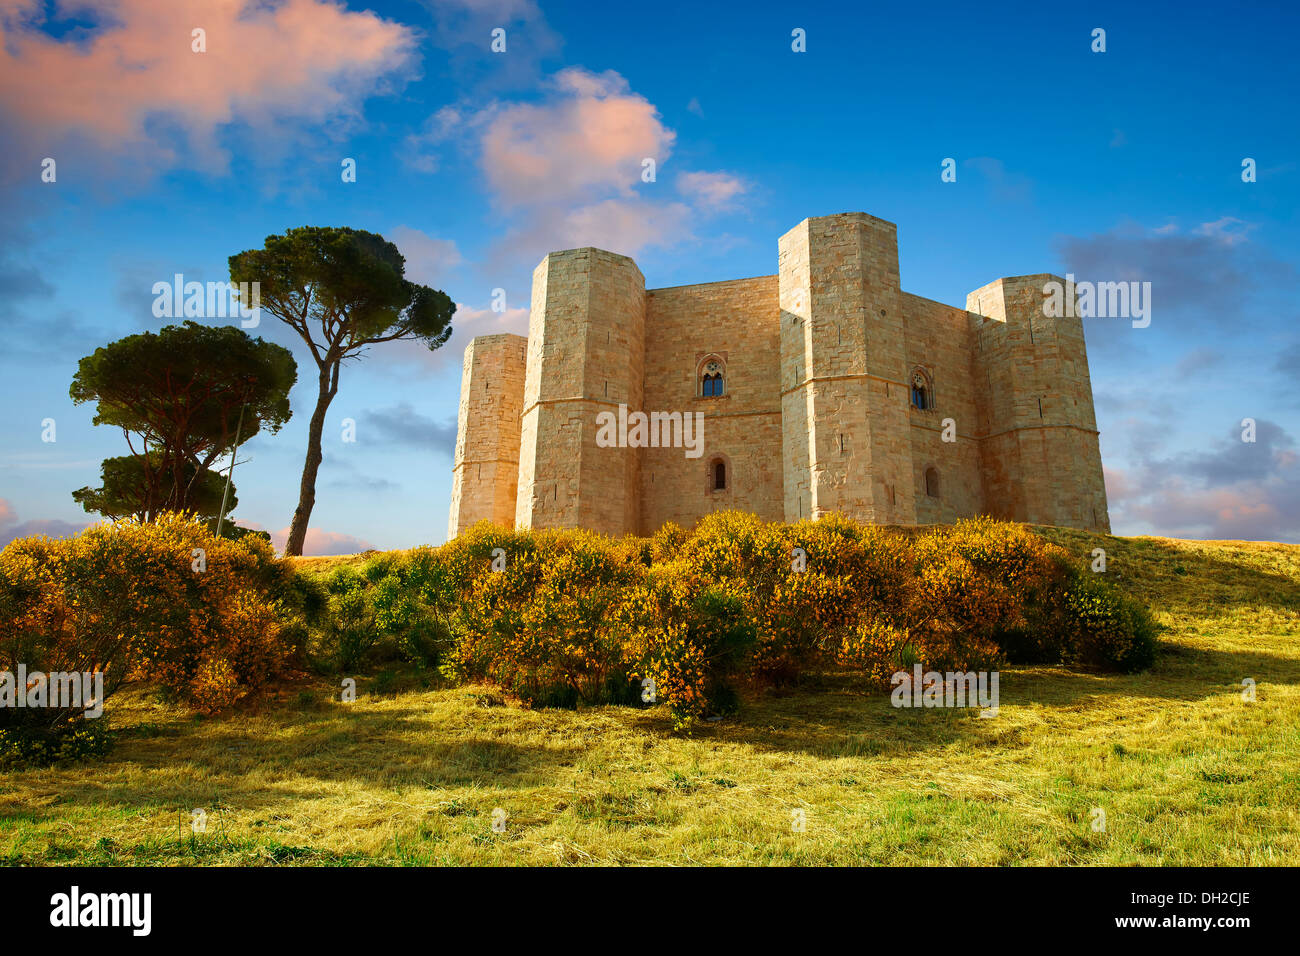 The medieval octagonal castle Castel Del Monte, near Andria in the Apulia southern Italy Stock Photo